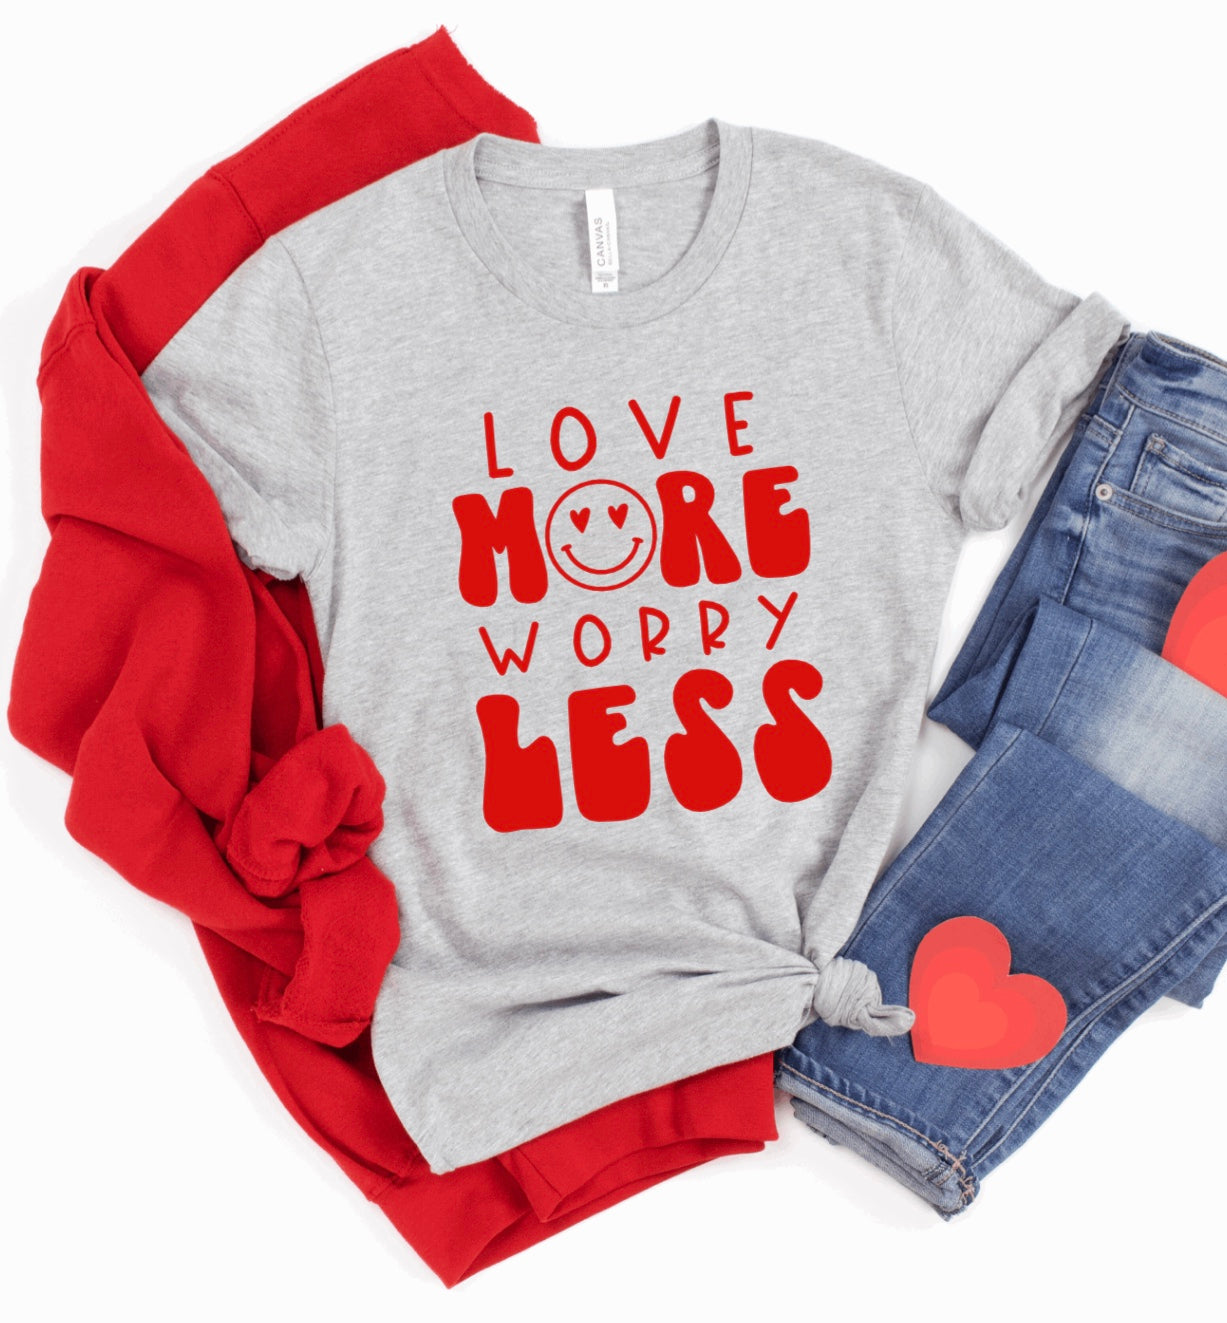 Love more worry less t-shirt 